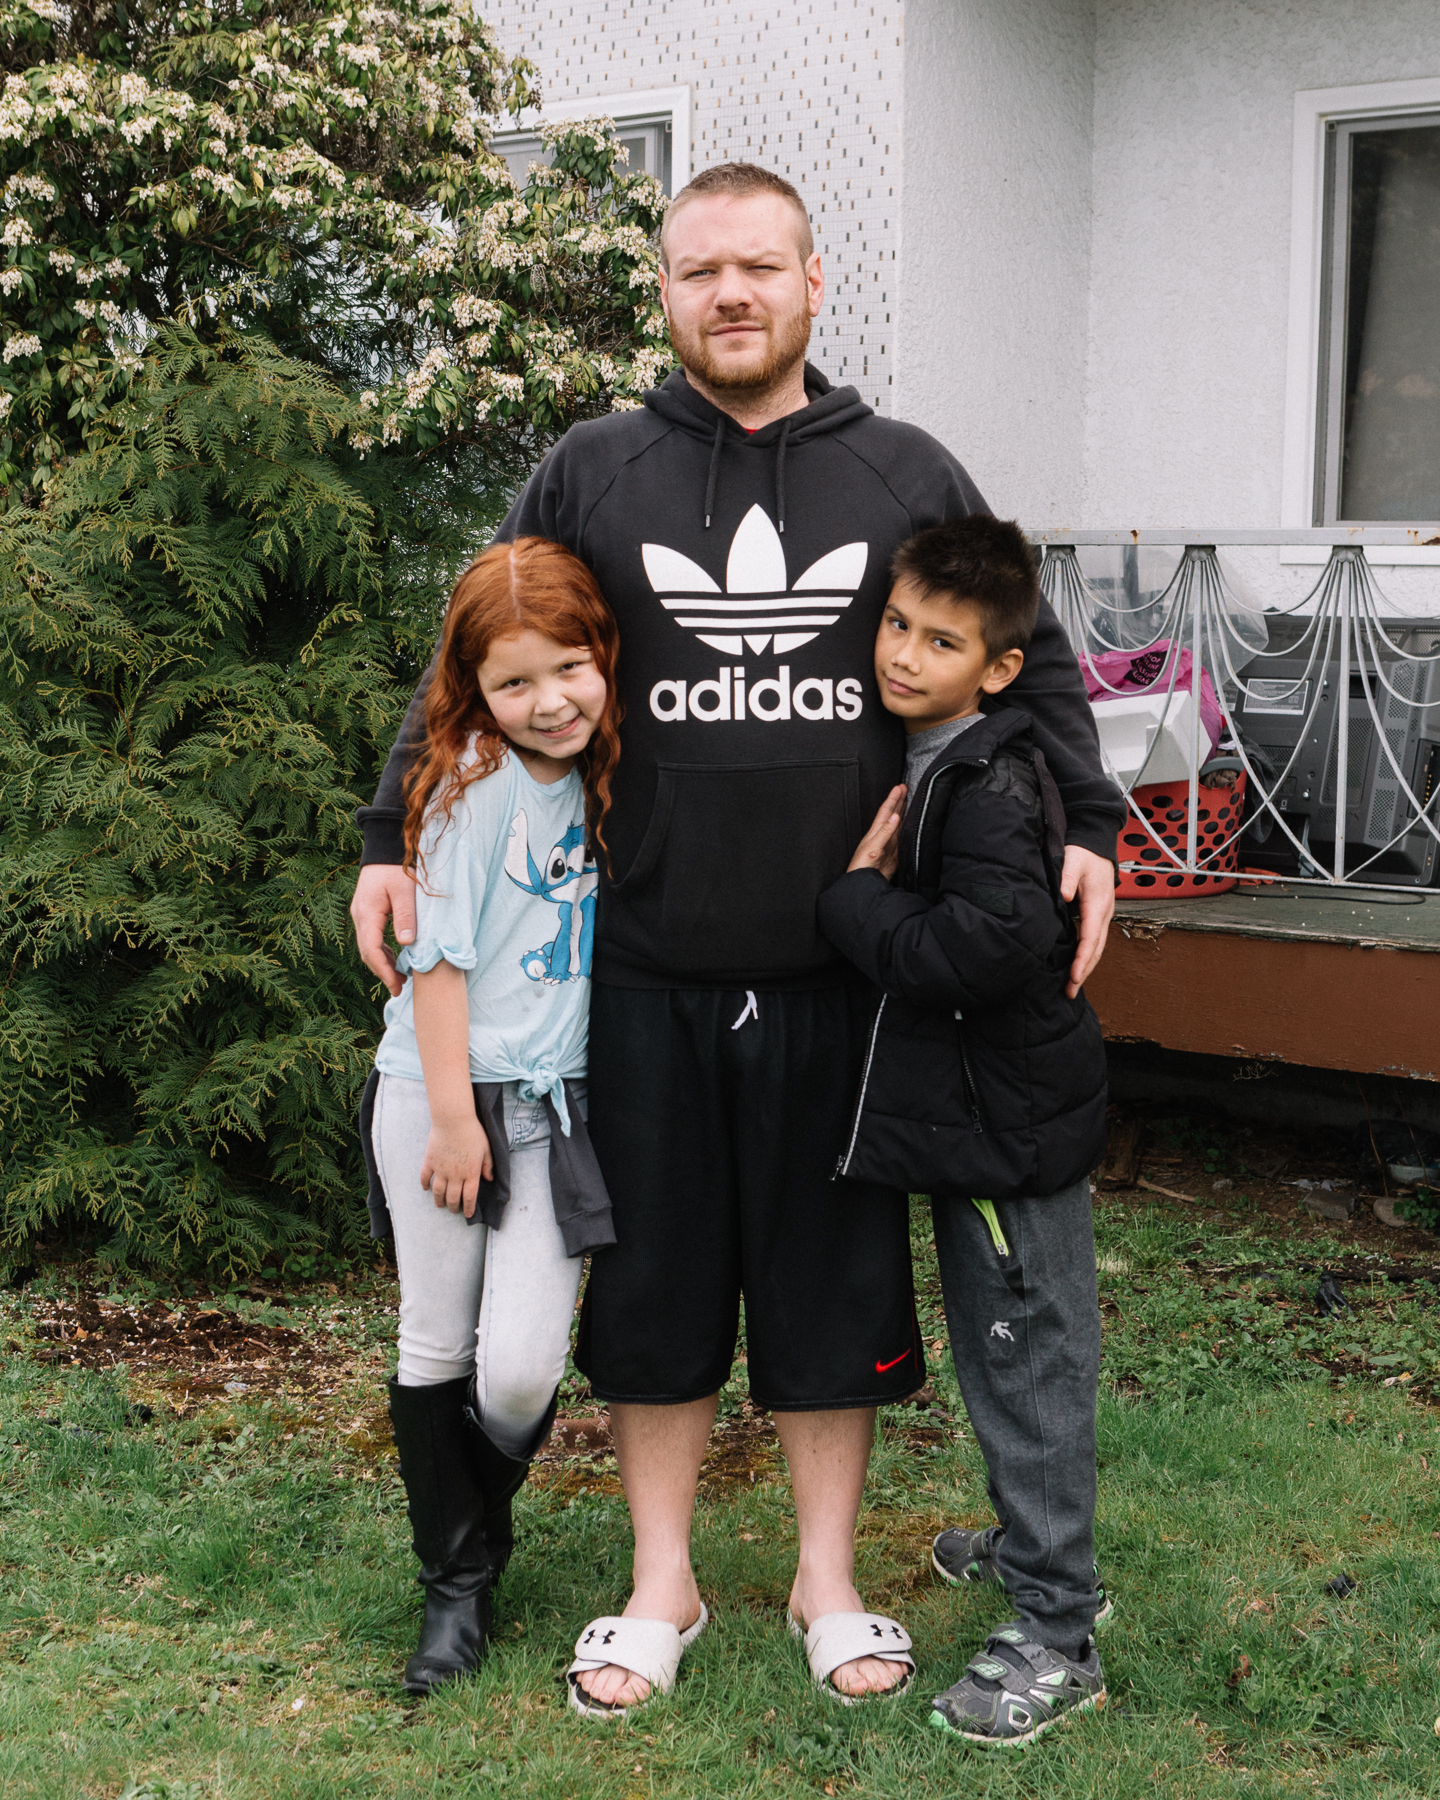   Josh    How long have you lived in Metrotown?   6 years   How does the housing crisis affect you?   The building is unsanitary for my kids and it is unaffordable.   Did you receive any help or support to find alternate housing?   No 